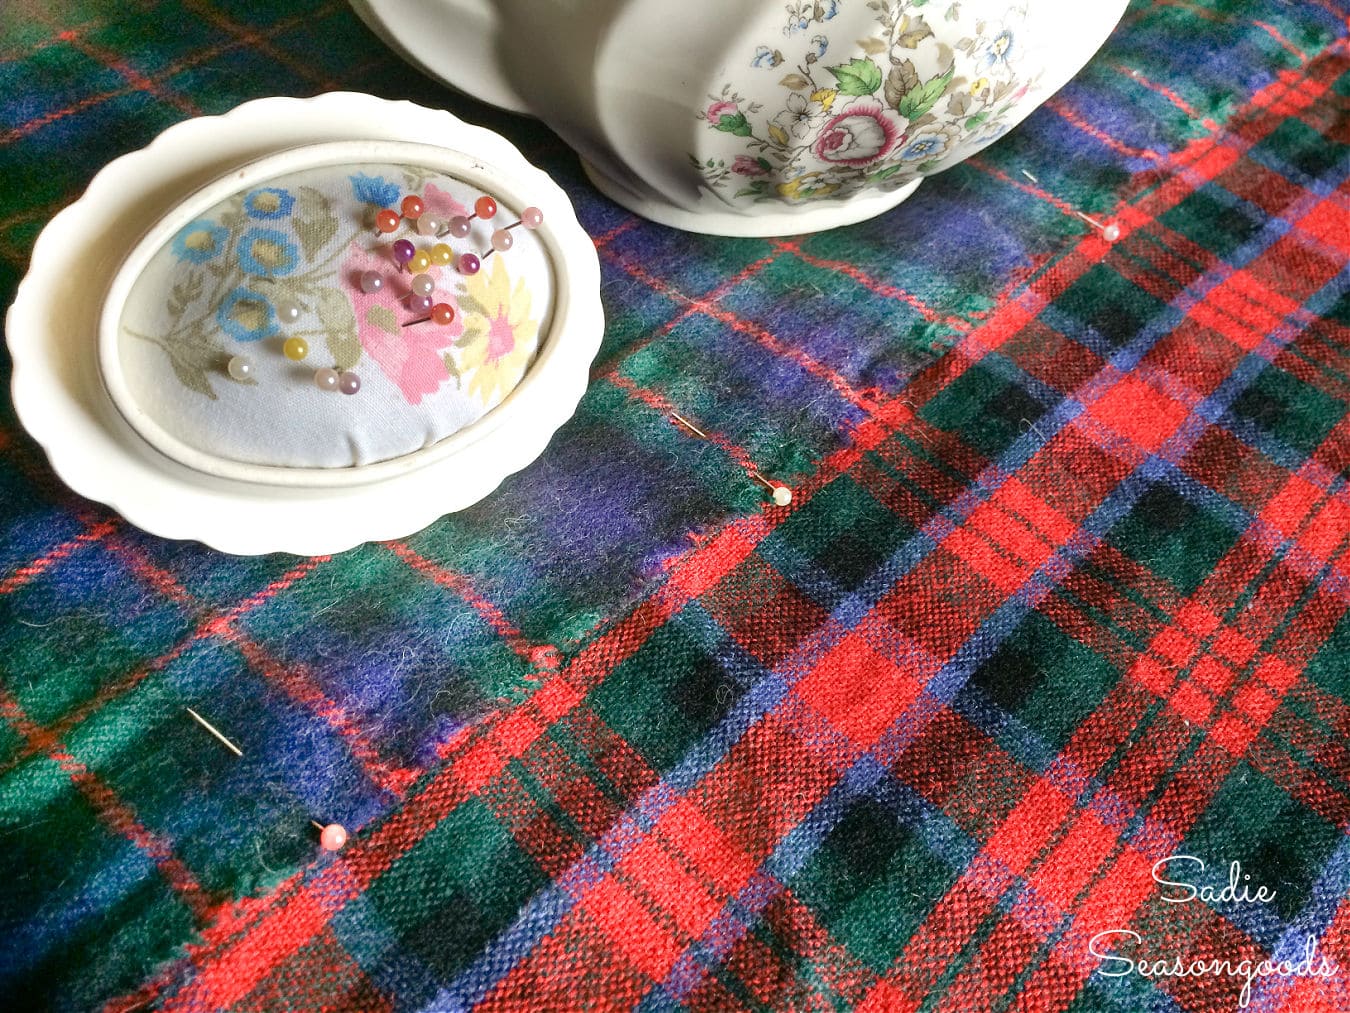 Pinning the tartan scarves together